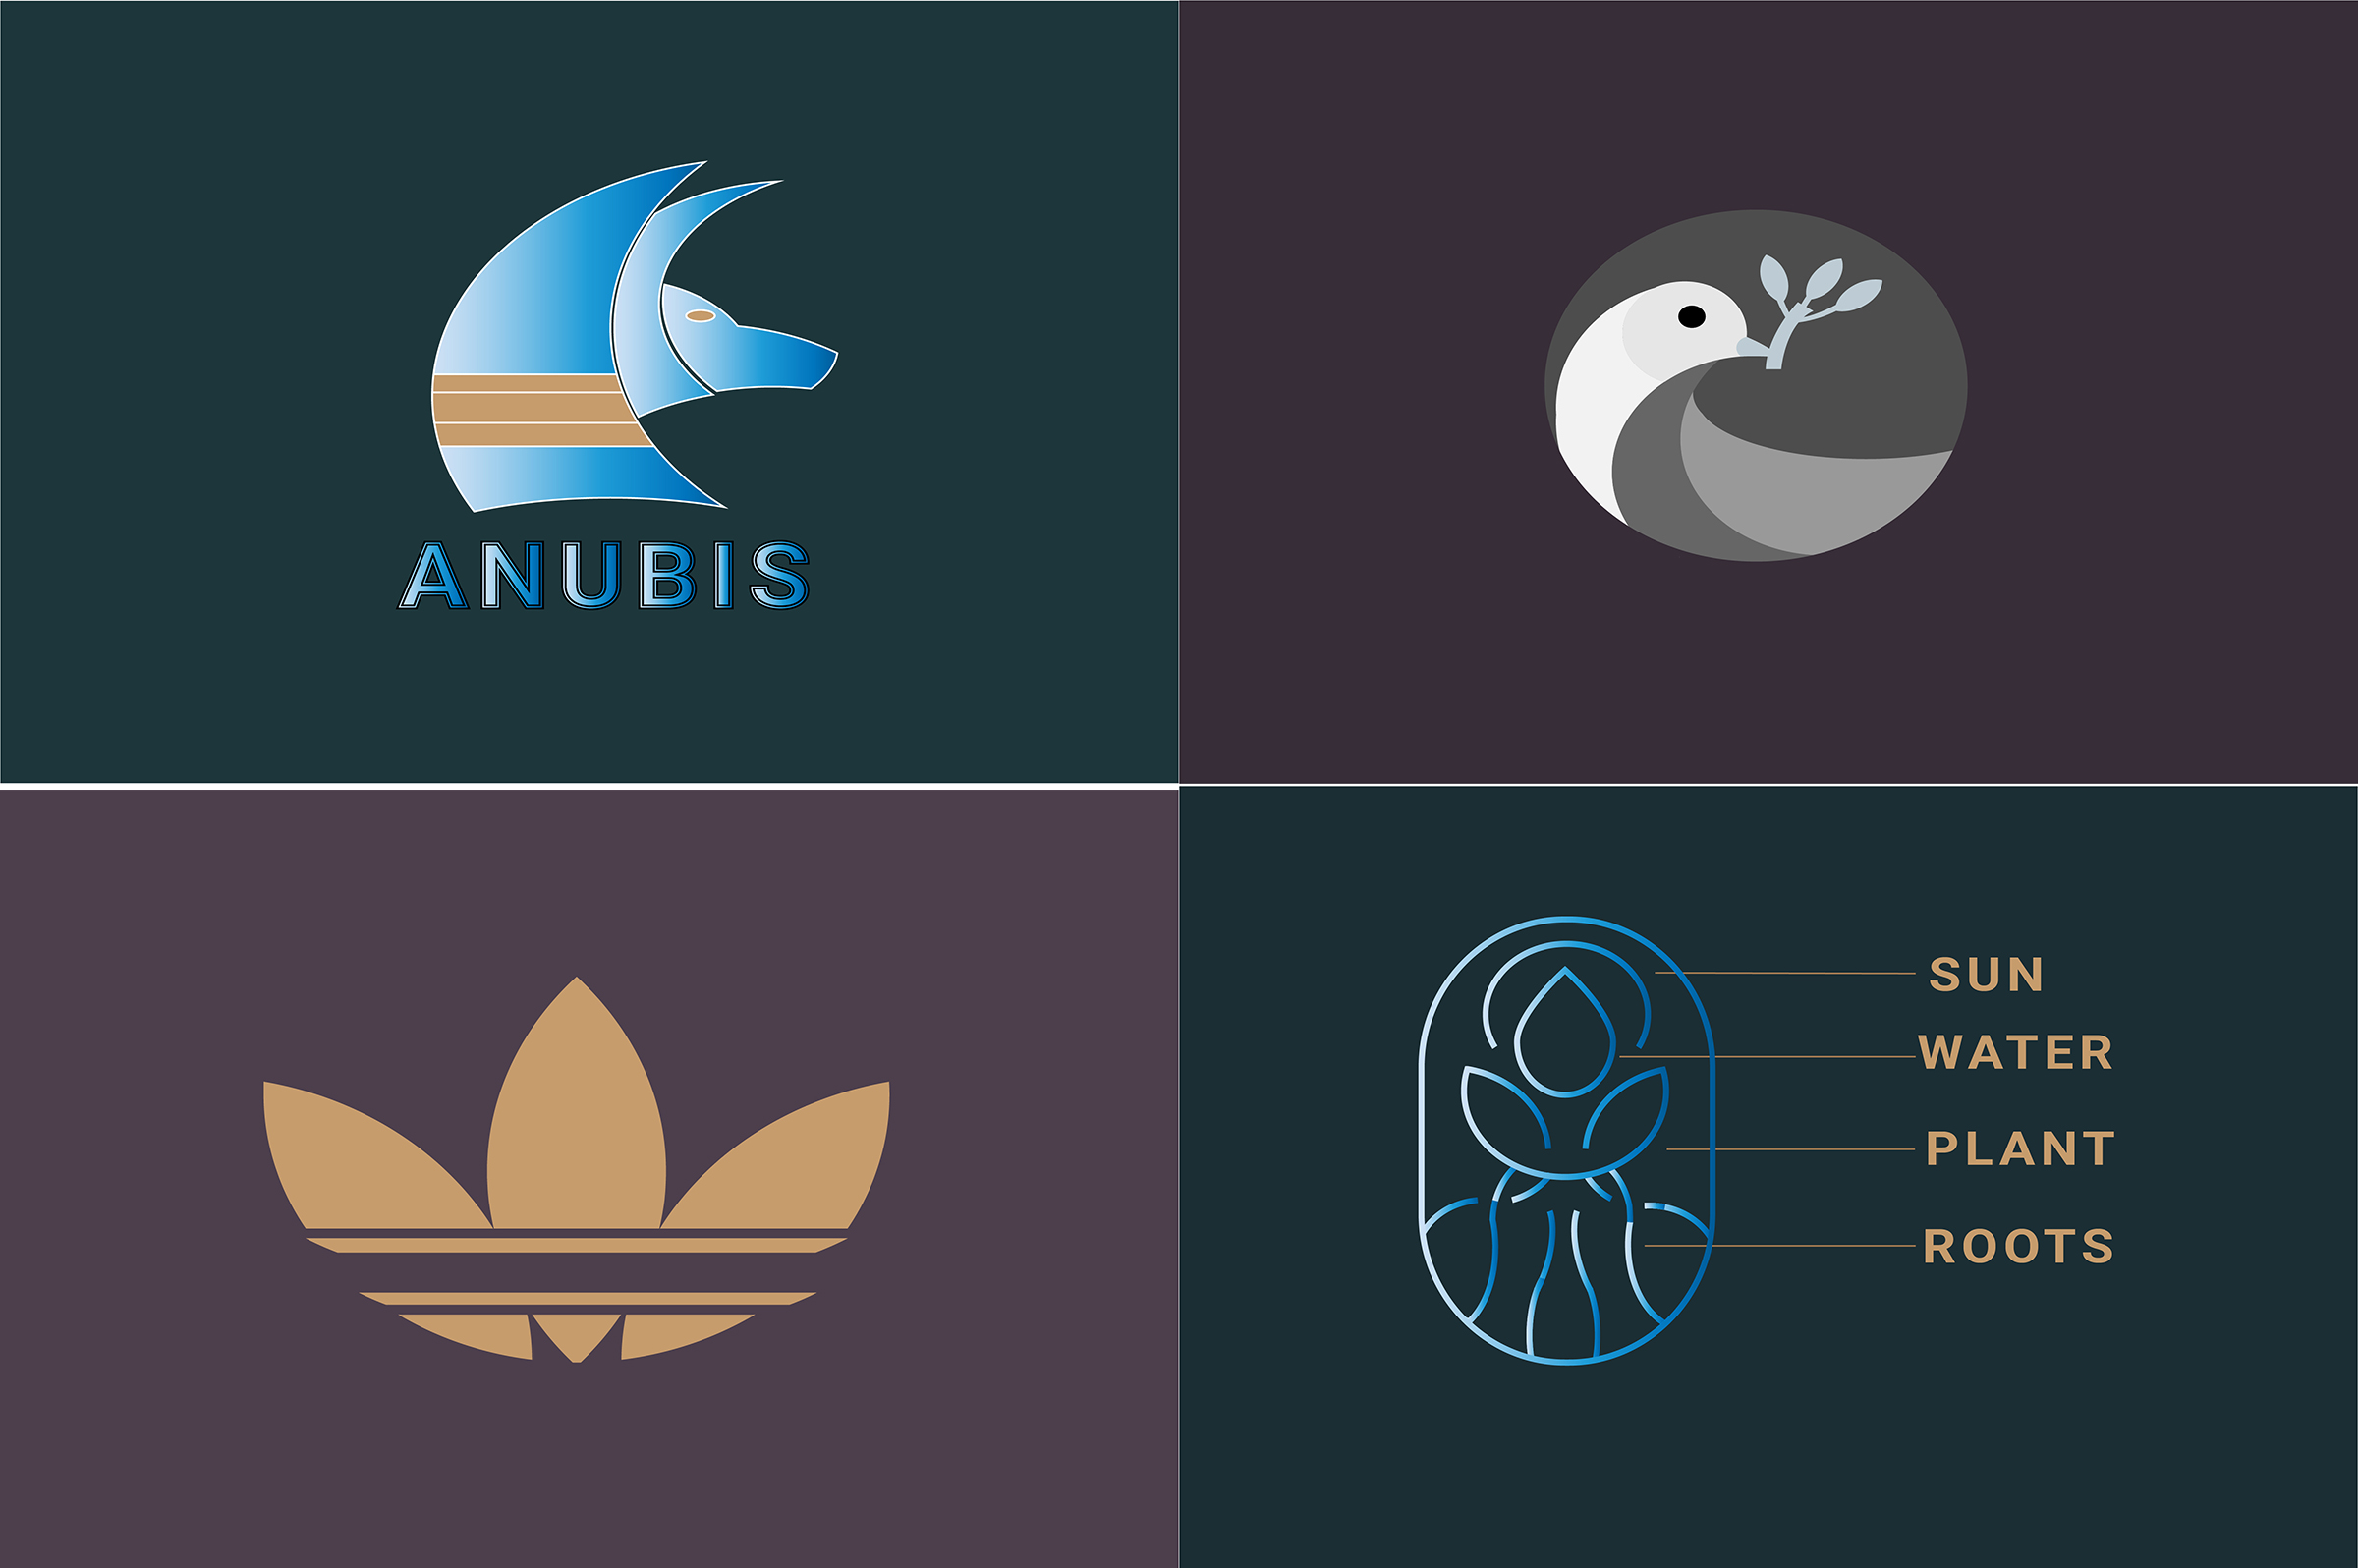 design minimalist and simple logo and graphics for $5 - SEOClerks